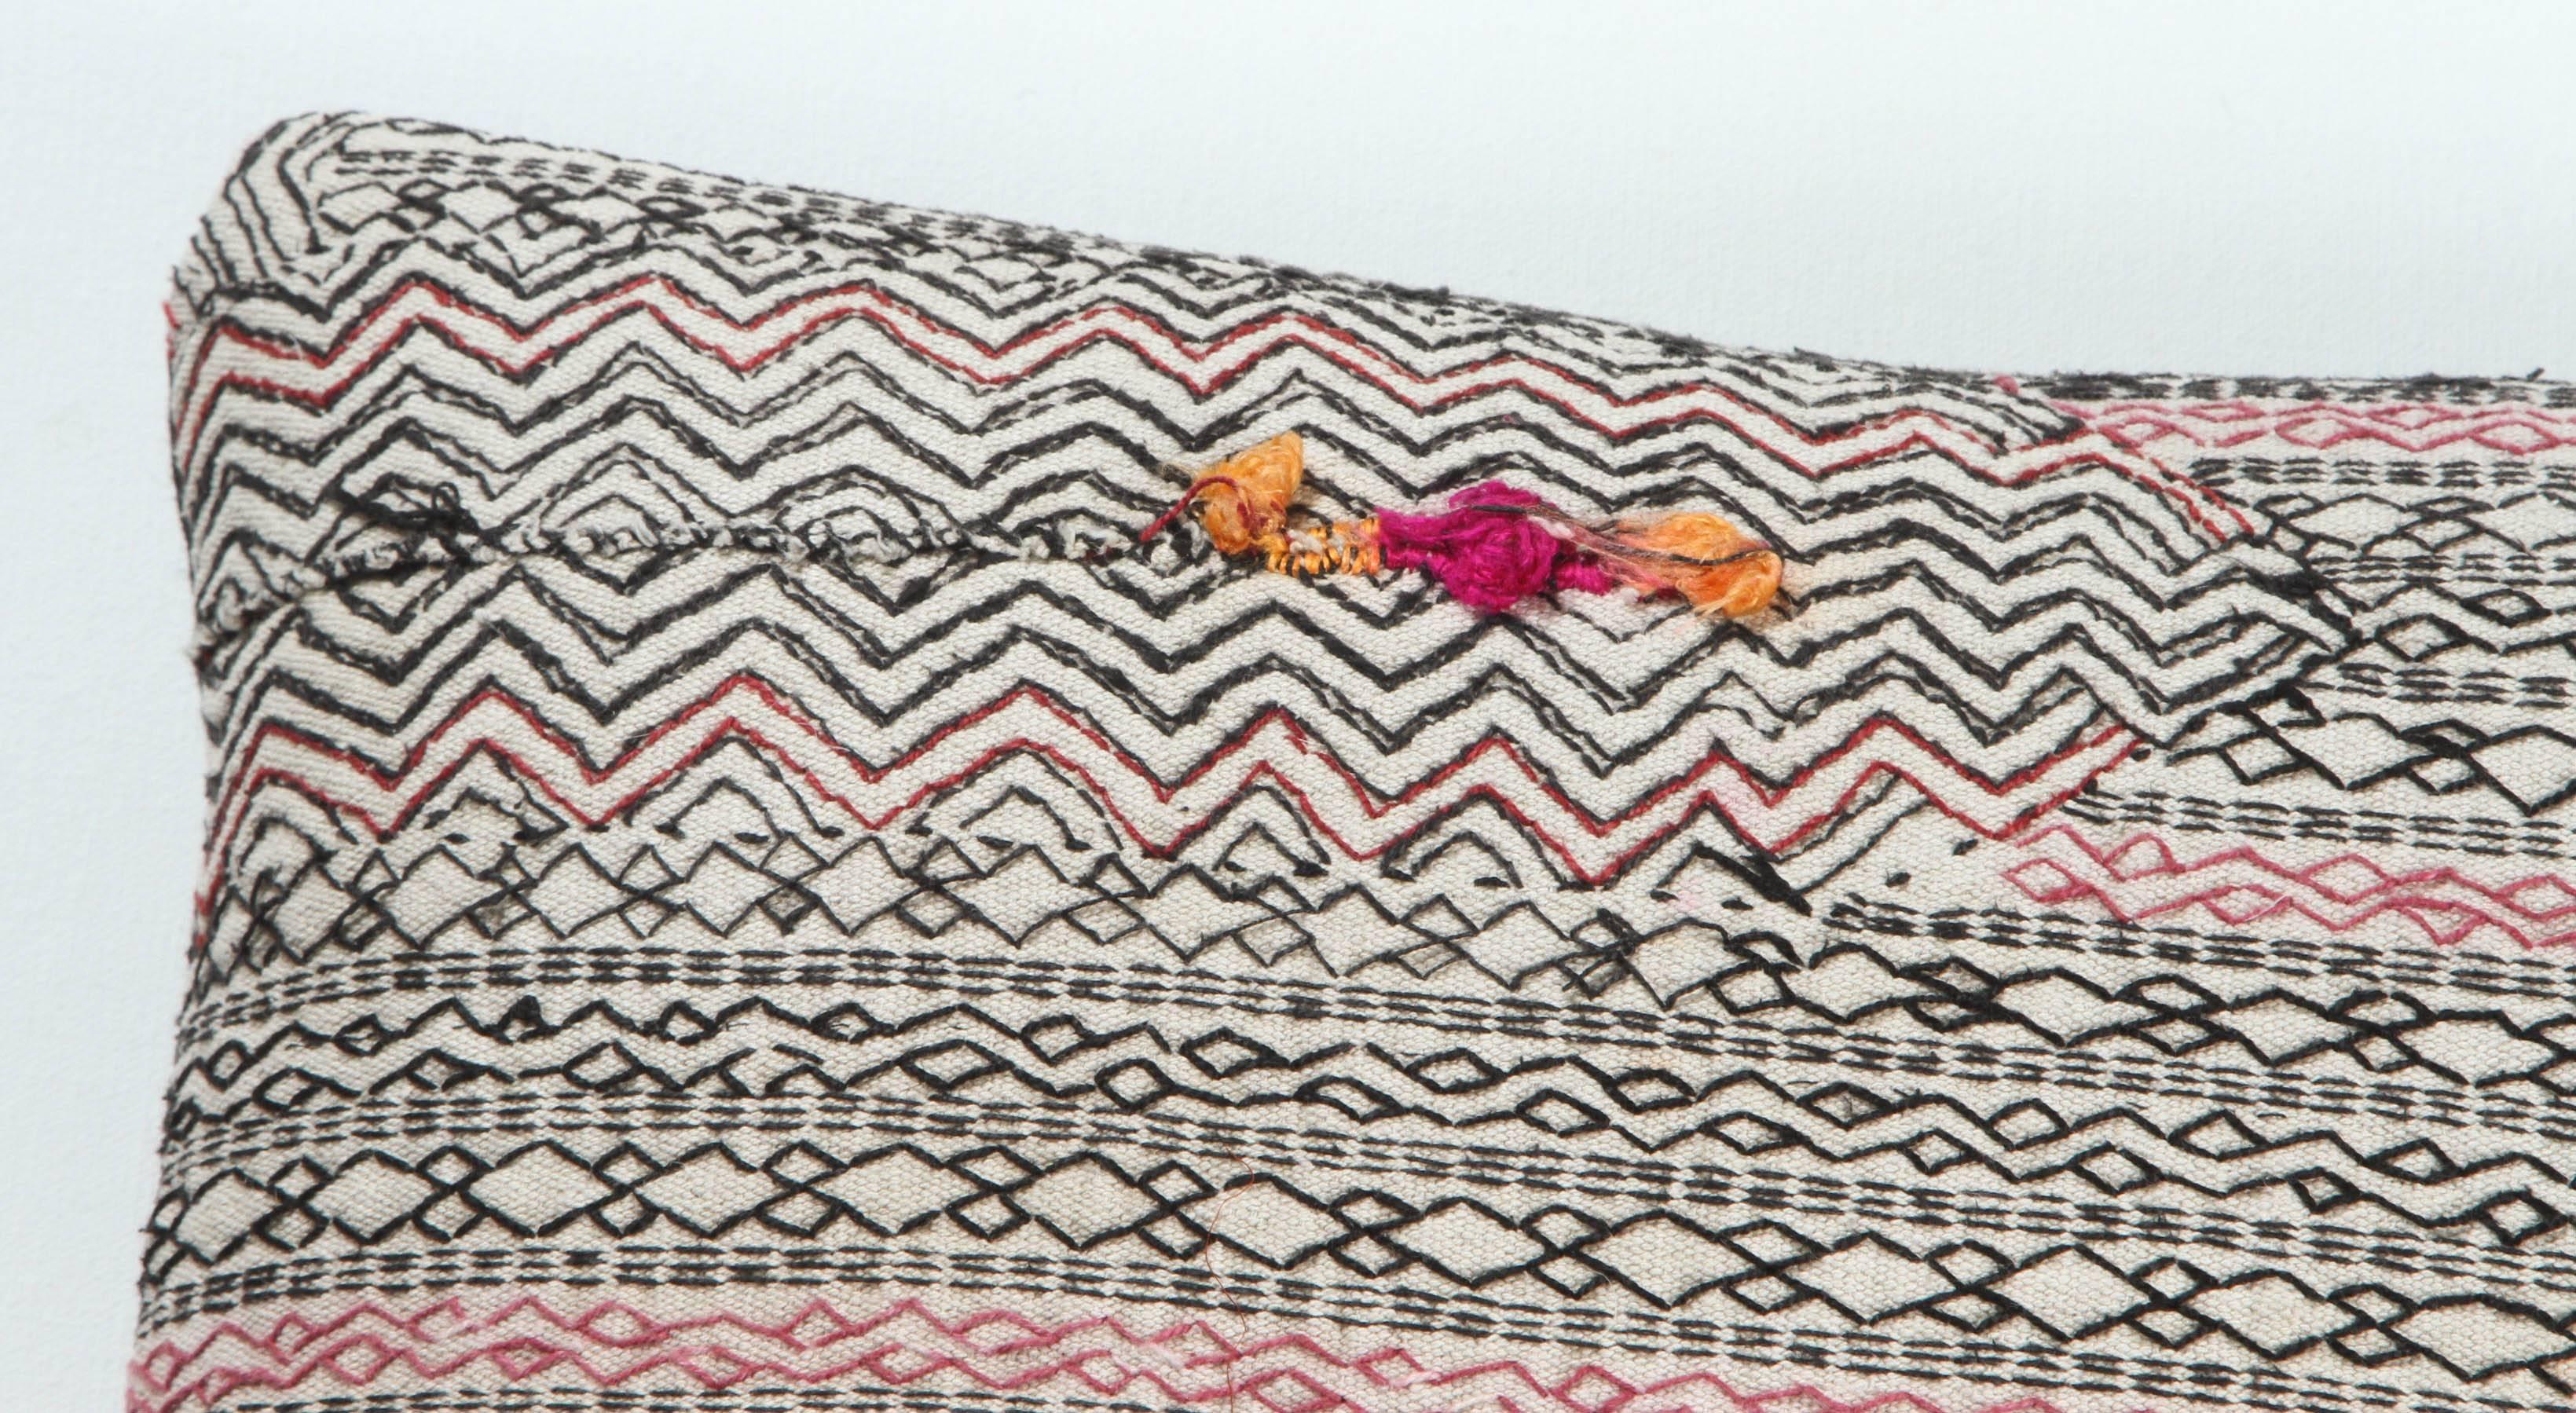 Vintage cotton on cotton embroidery producing a heavy quilted effect. Shades of black and white and (red). Small yellow and pink silk floss detail. Zig zag and geometric striped Vintage cotton on cotton embroidery producing a heavy quilted effect.